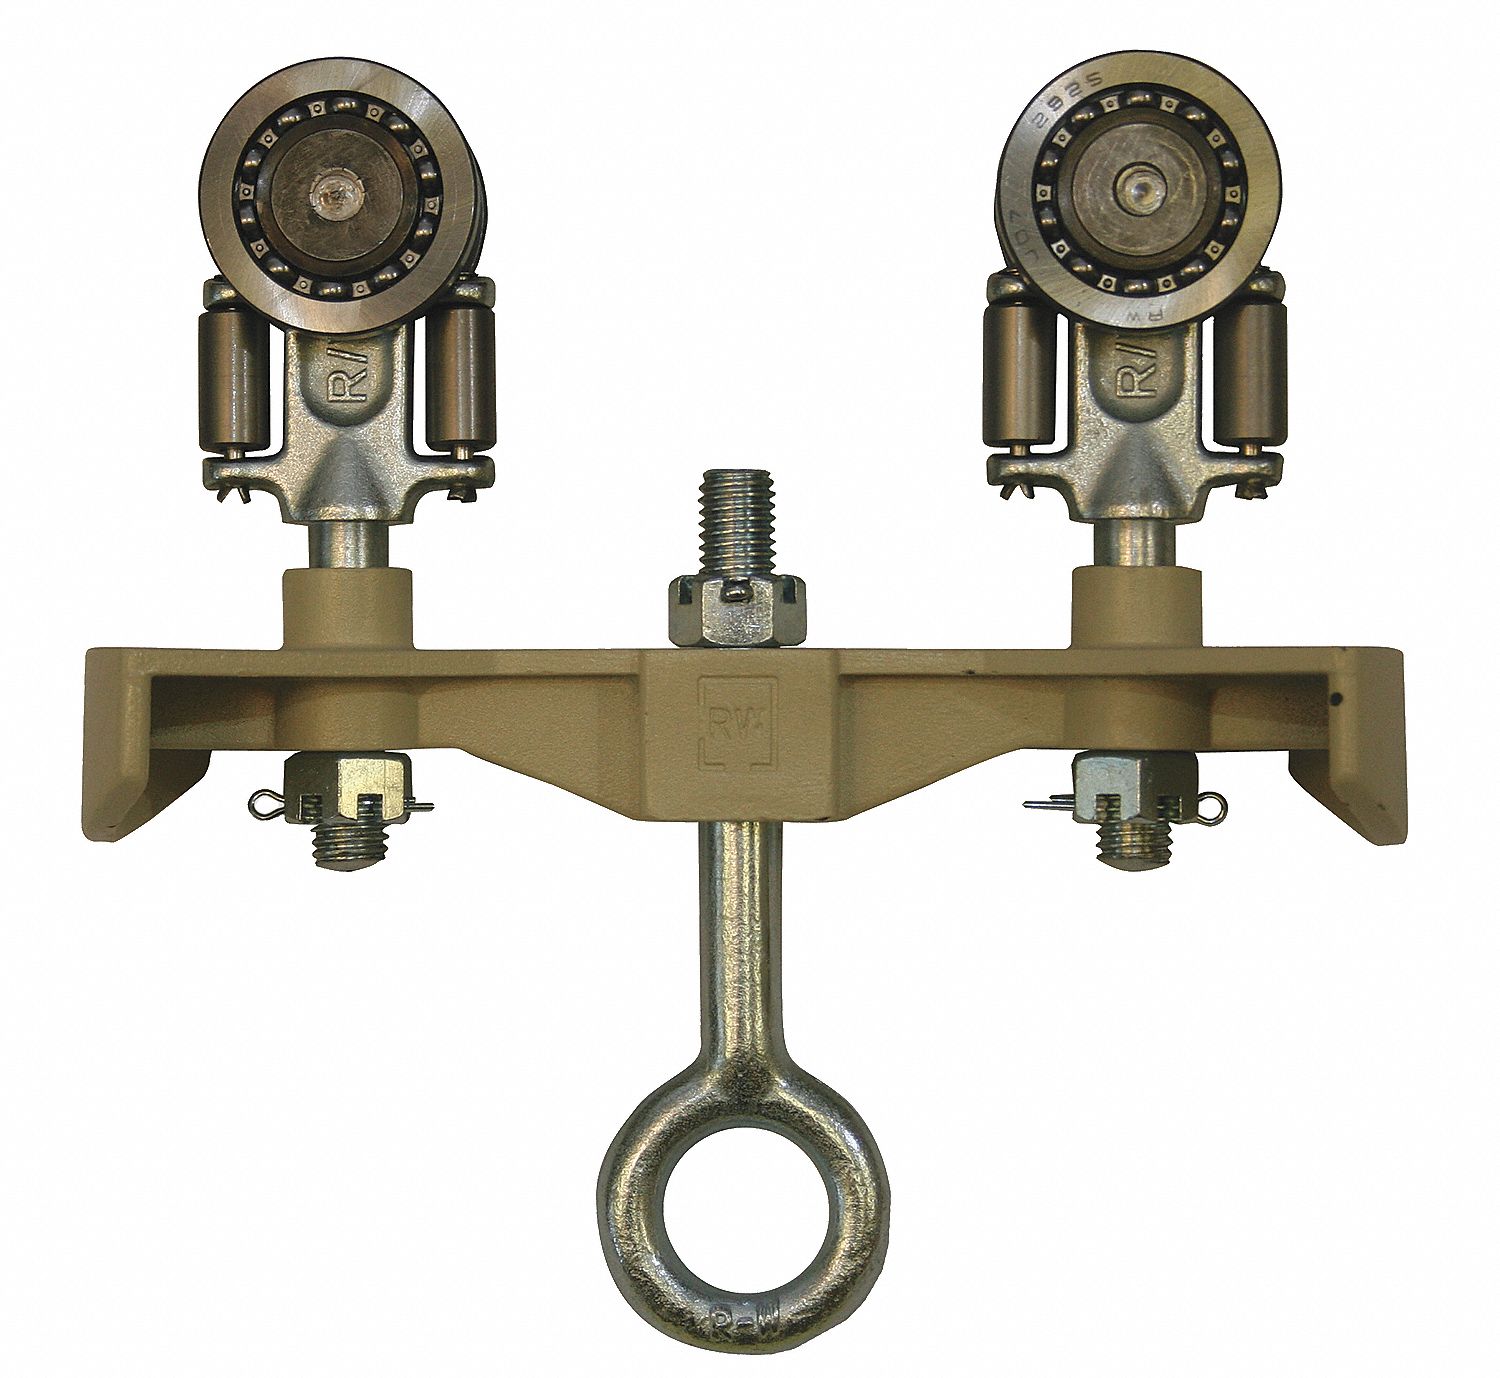 Manual-Push Carrier: Wheel Assemblies, Load Bar, Eye-bolt, Cotter Pins and Nuts for Field Assembly